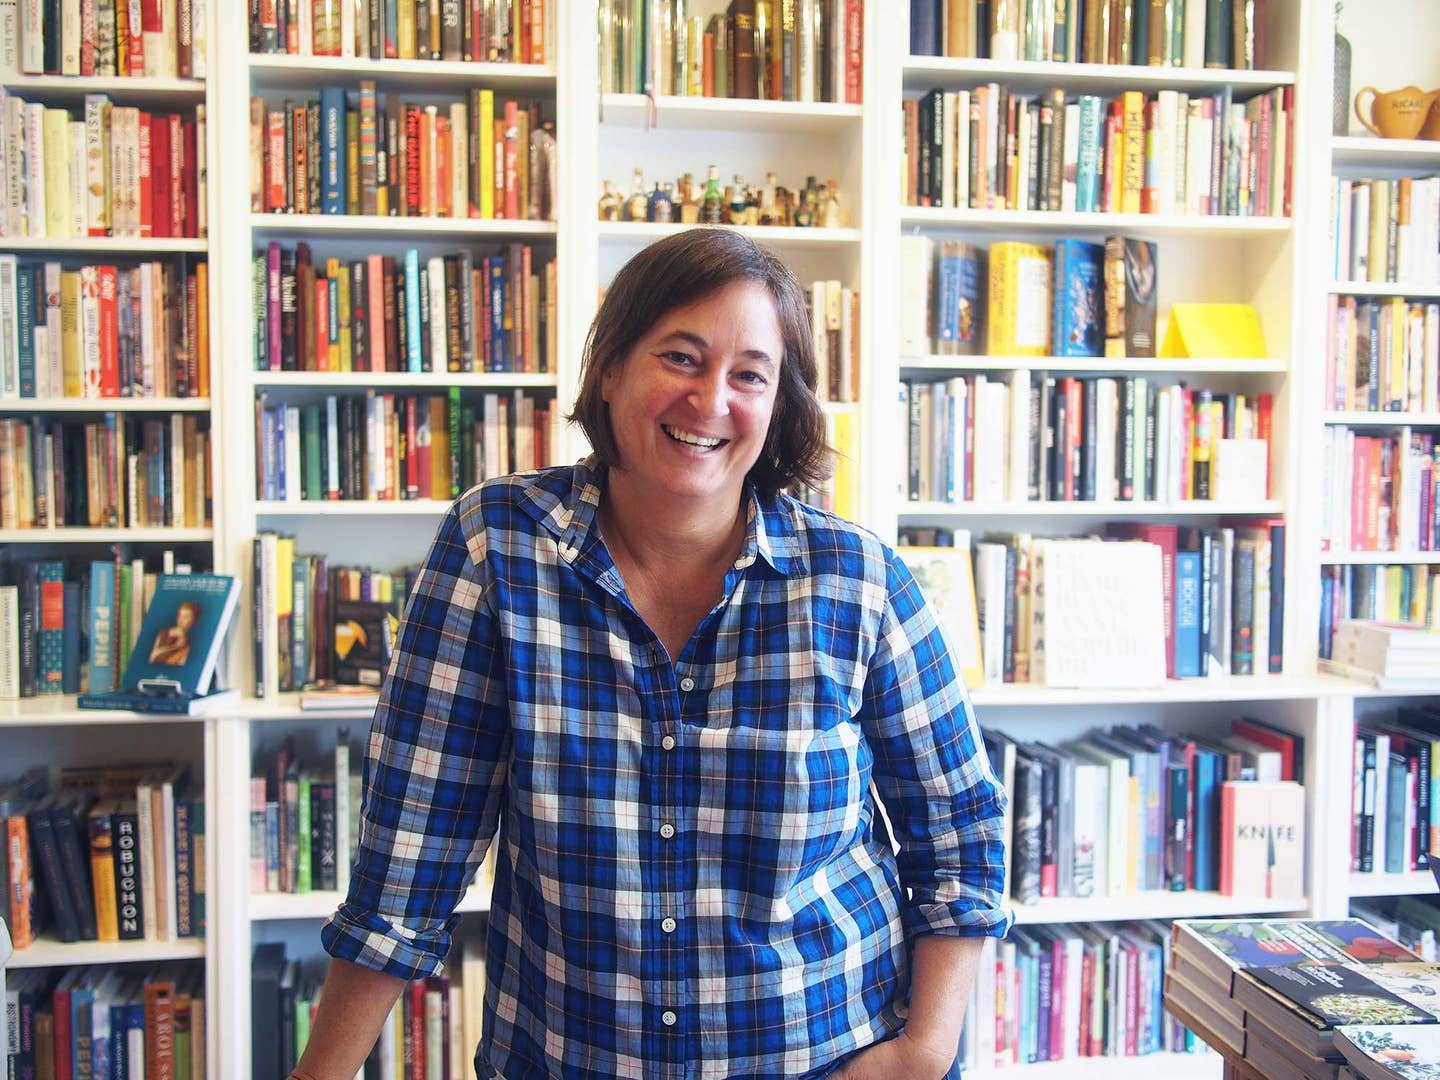 Omnivore Books’ Celia Sack Wants to See More African Cookbooks